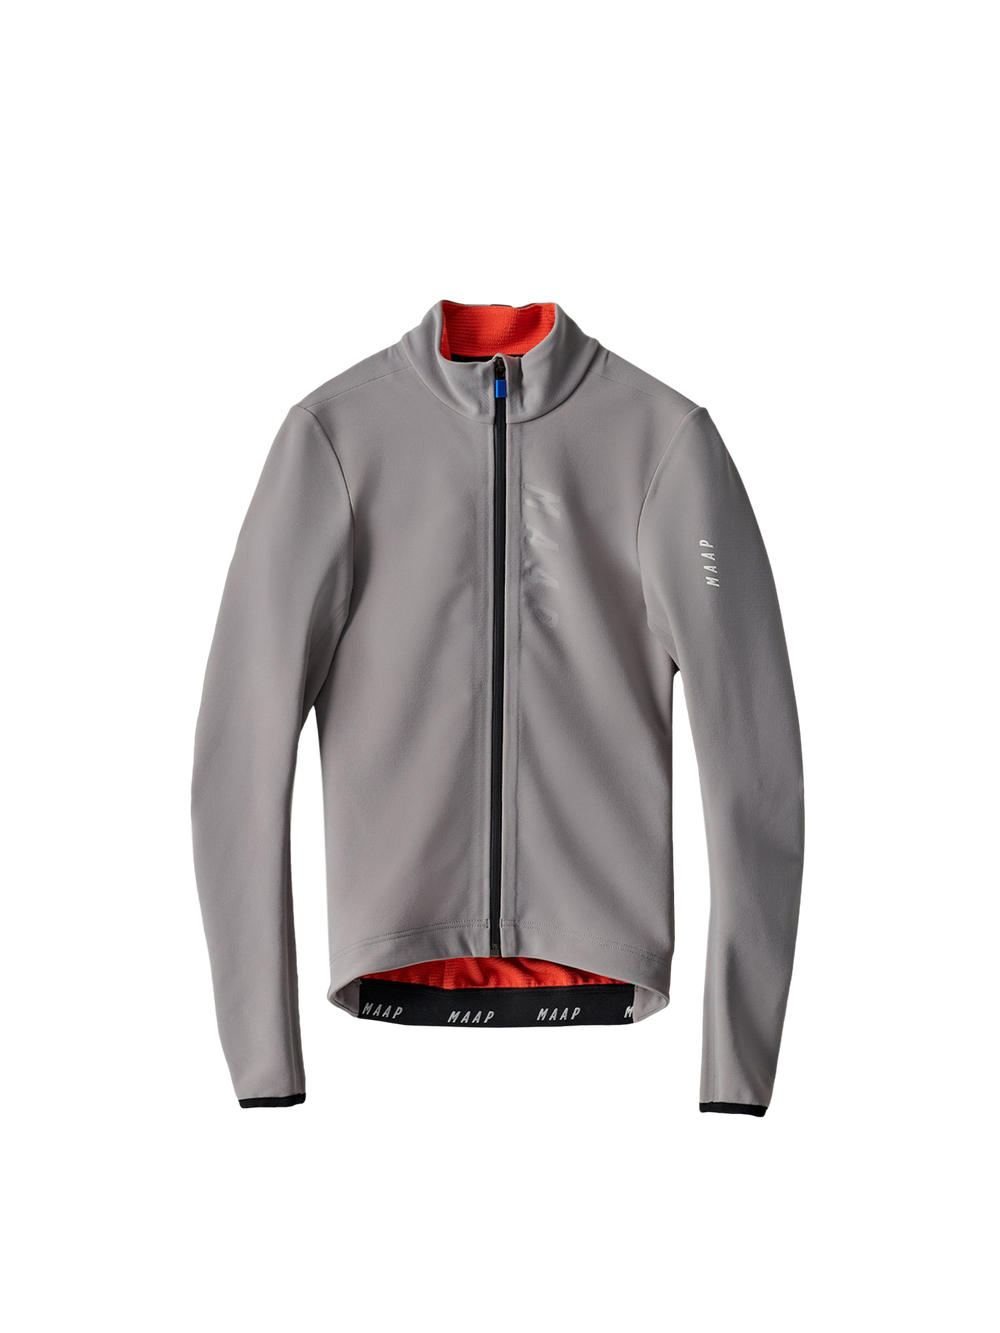 Product Image for Women's Apex Winter Jacket 2.0